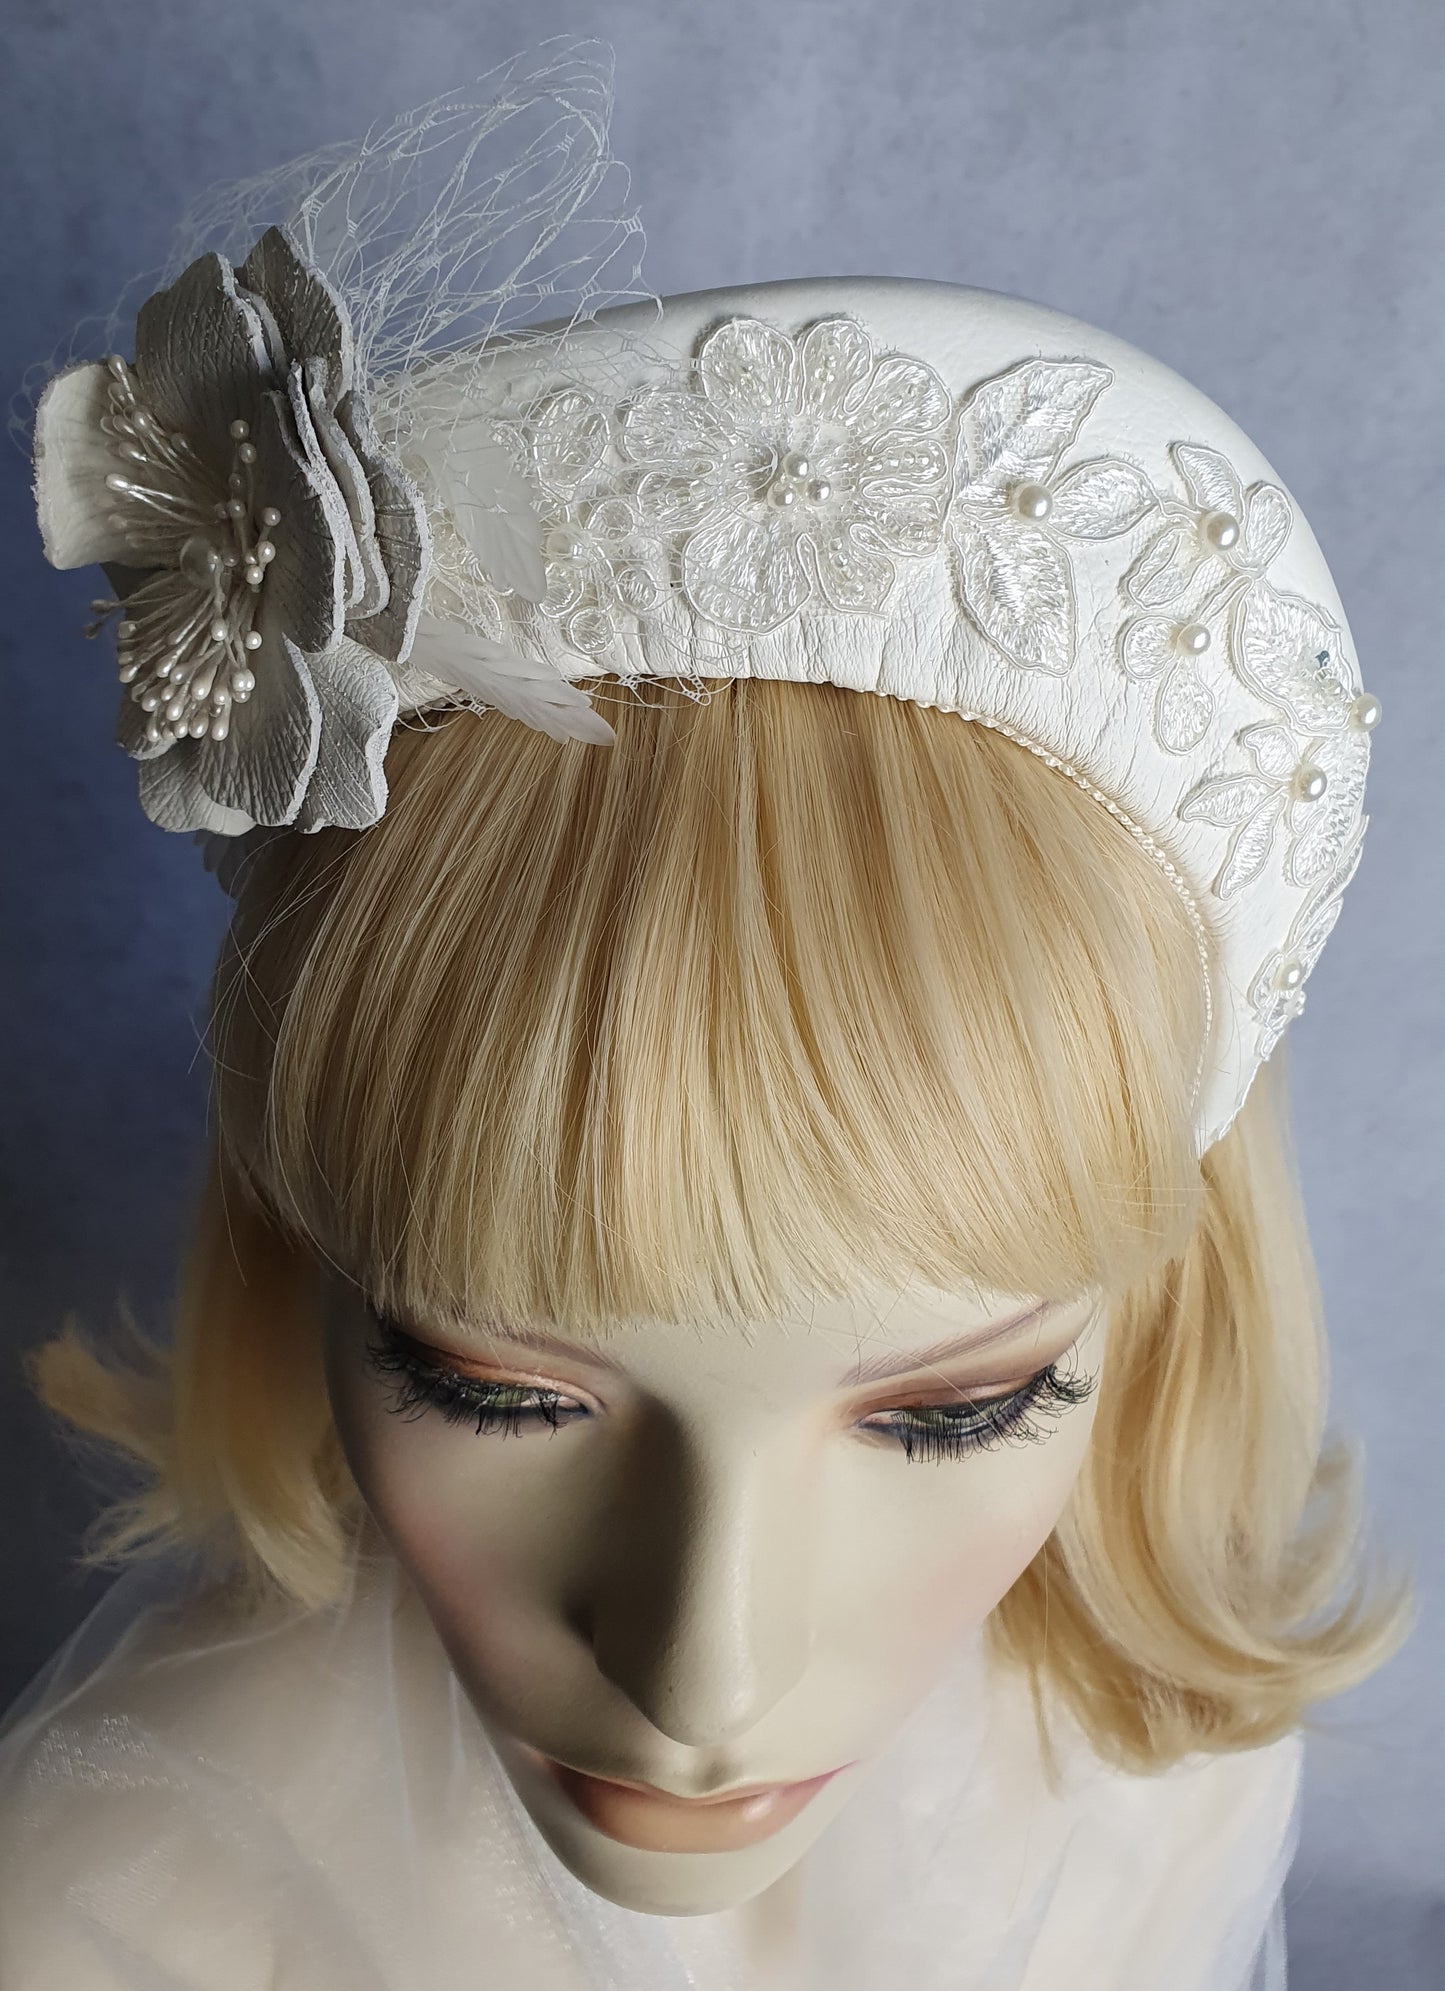 Handmade white Headband made of natural leather - for a special occasion. Fascinator, Tiara, Hairband, Headband